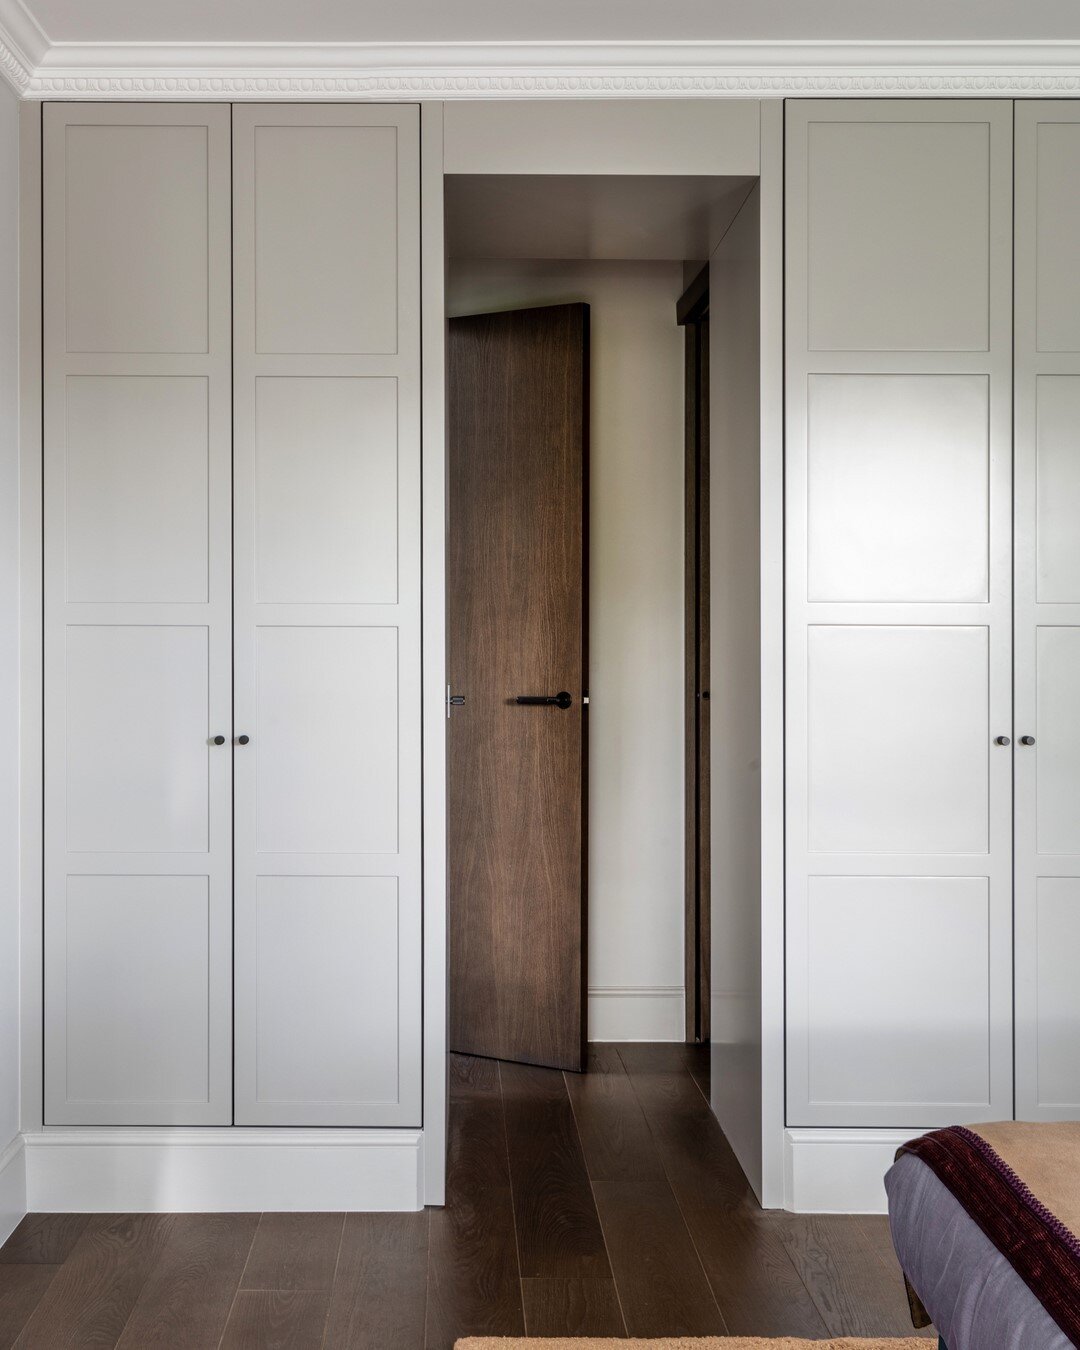 Sometimes simplicity is 🗝⠀⠀⠀⠀⠀⠀⠀⠀⠀
Bespoke wardrobes and bespoke door designed and built by us to maximise the feeling of height as well as storage in a top floor apartment in Marylebone (where both height and storage can be in short supply!). We lo